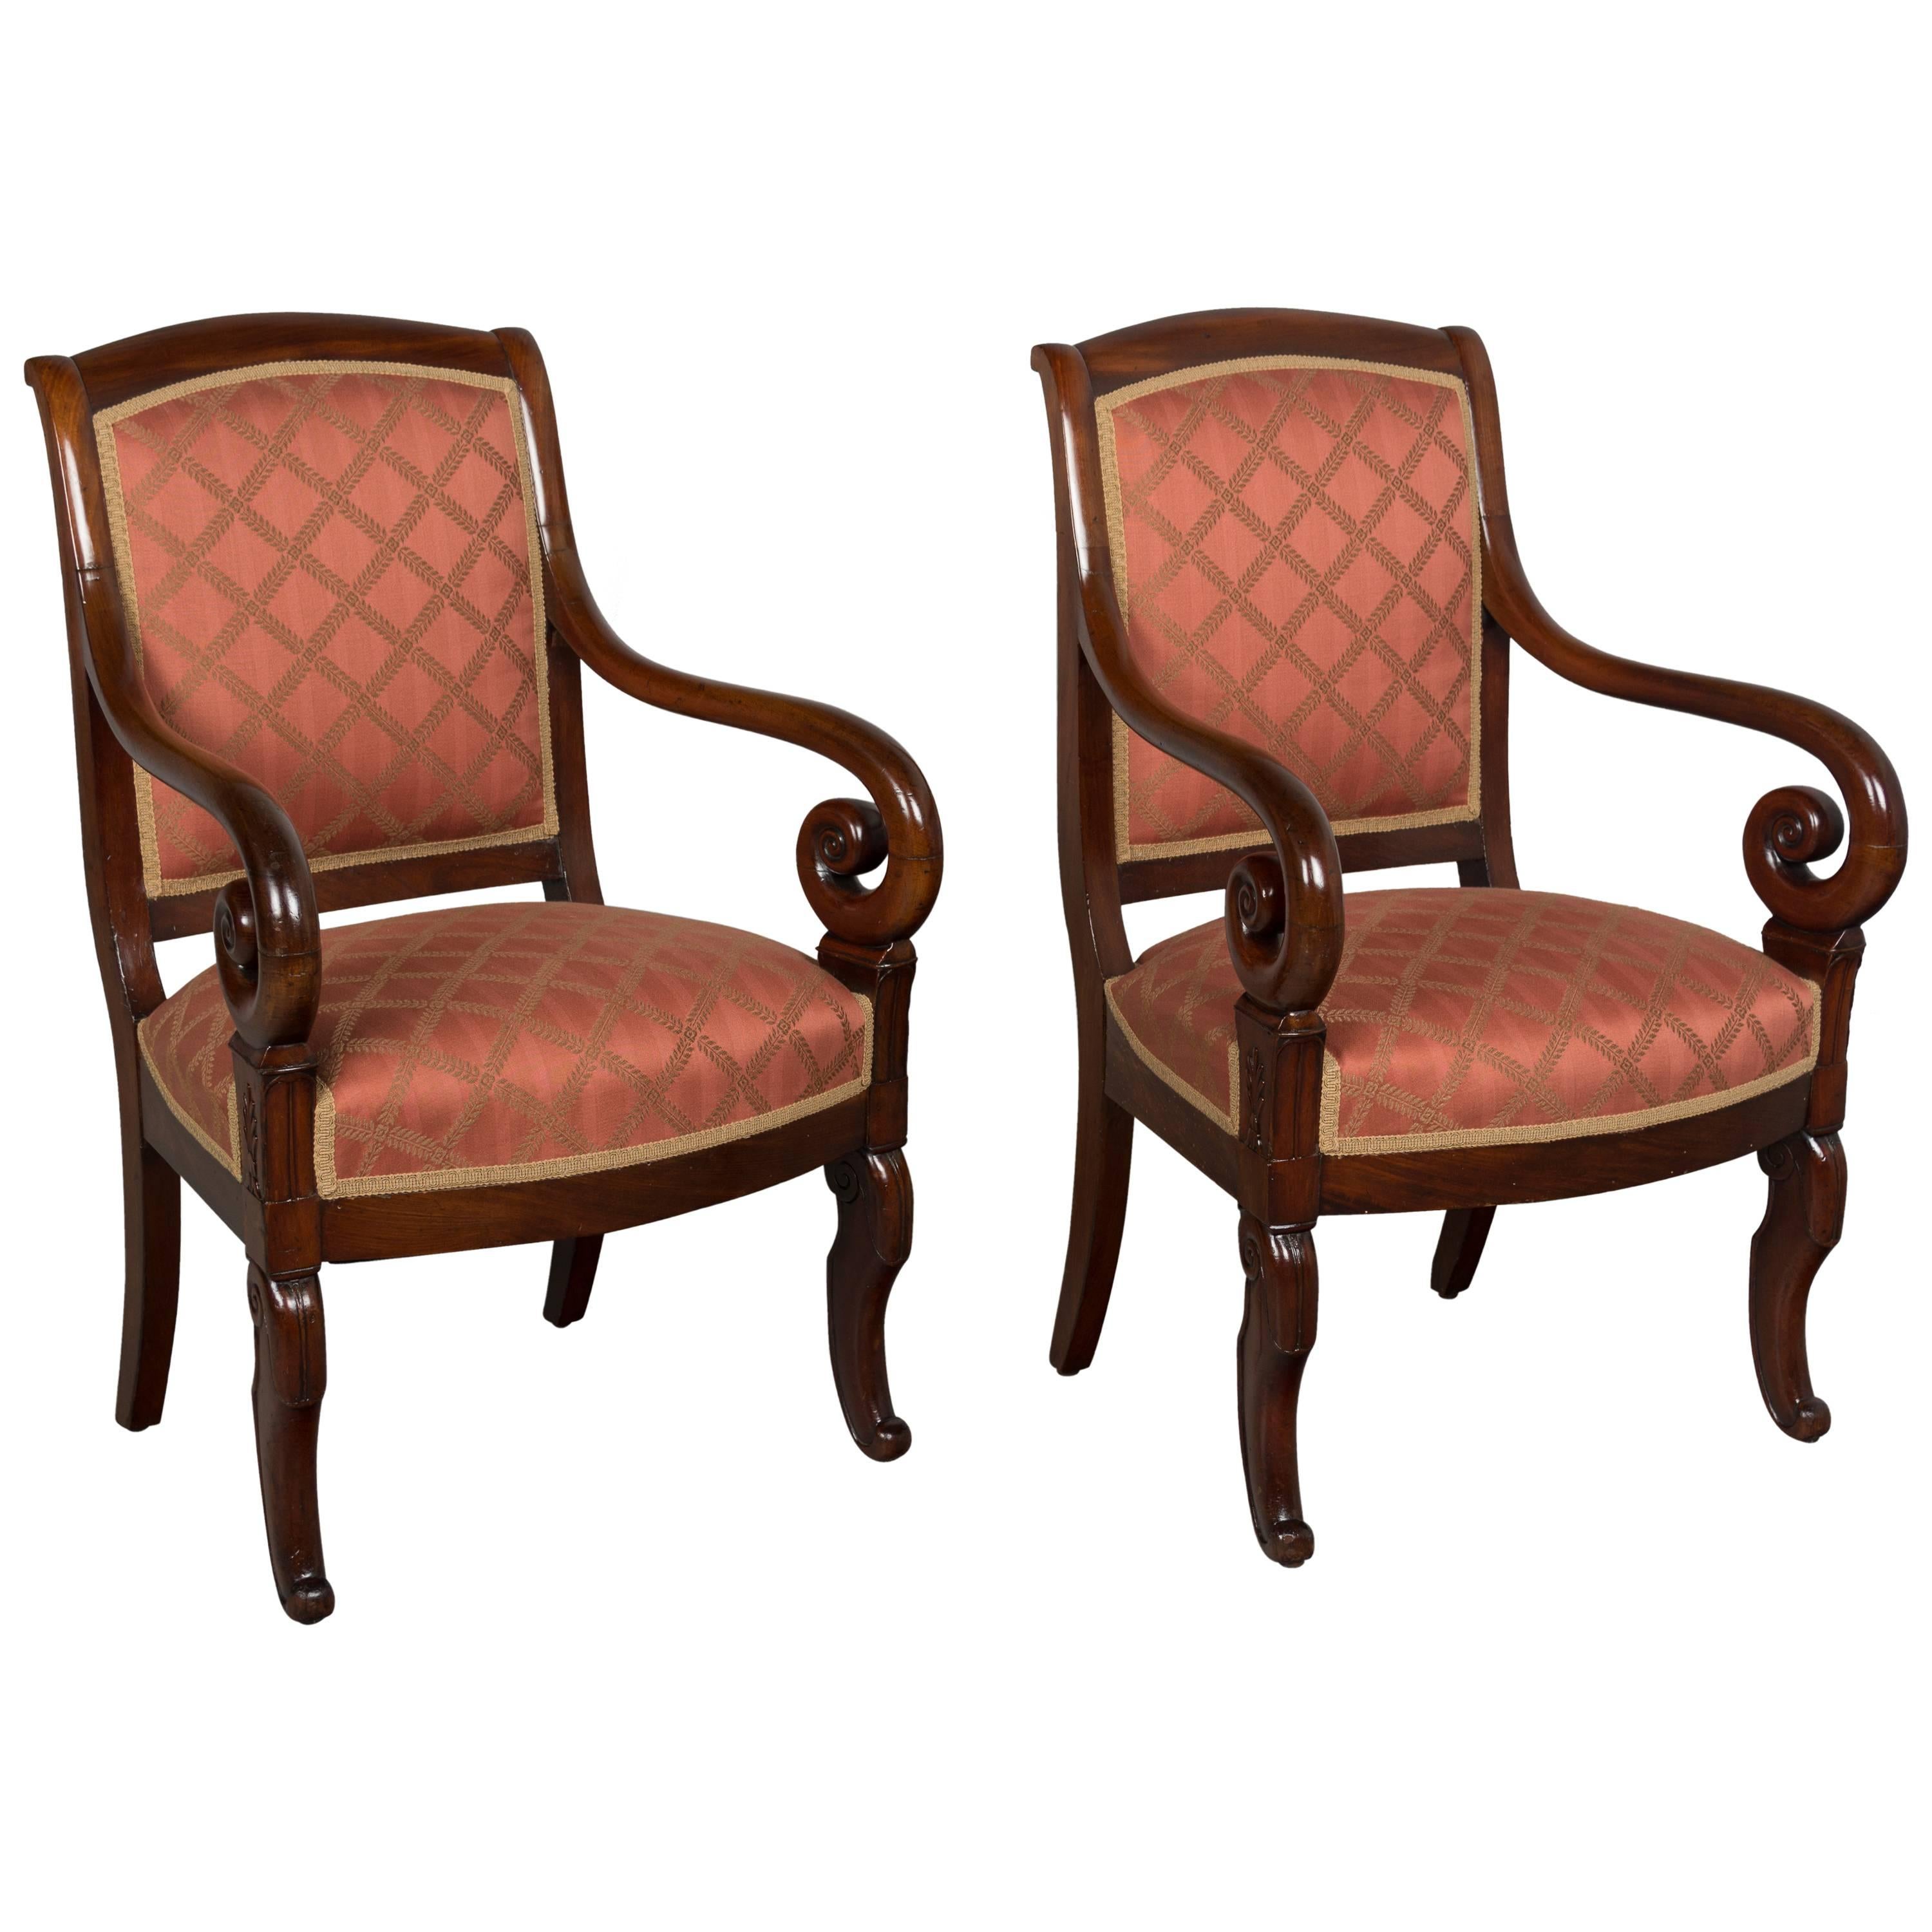 Pair of 19th Century French Restauration Armchairs